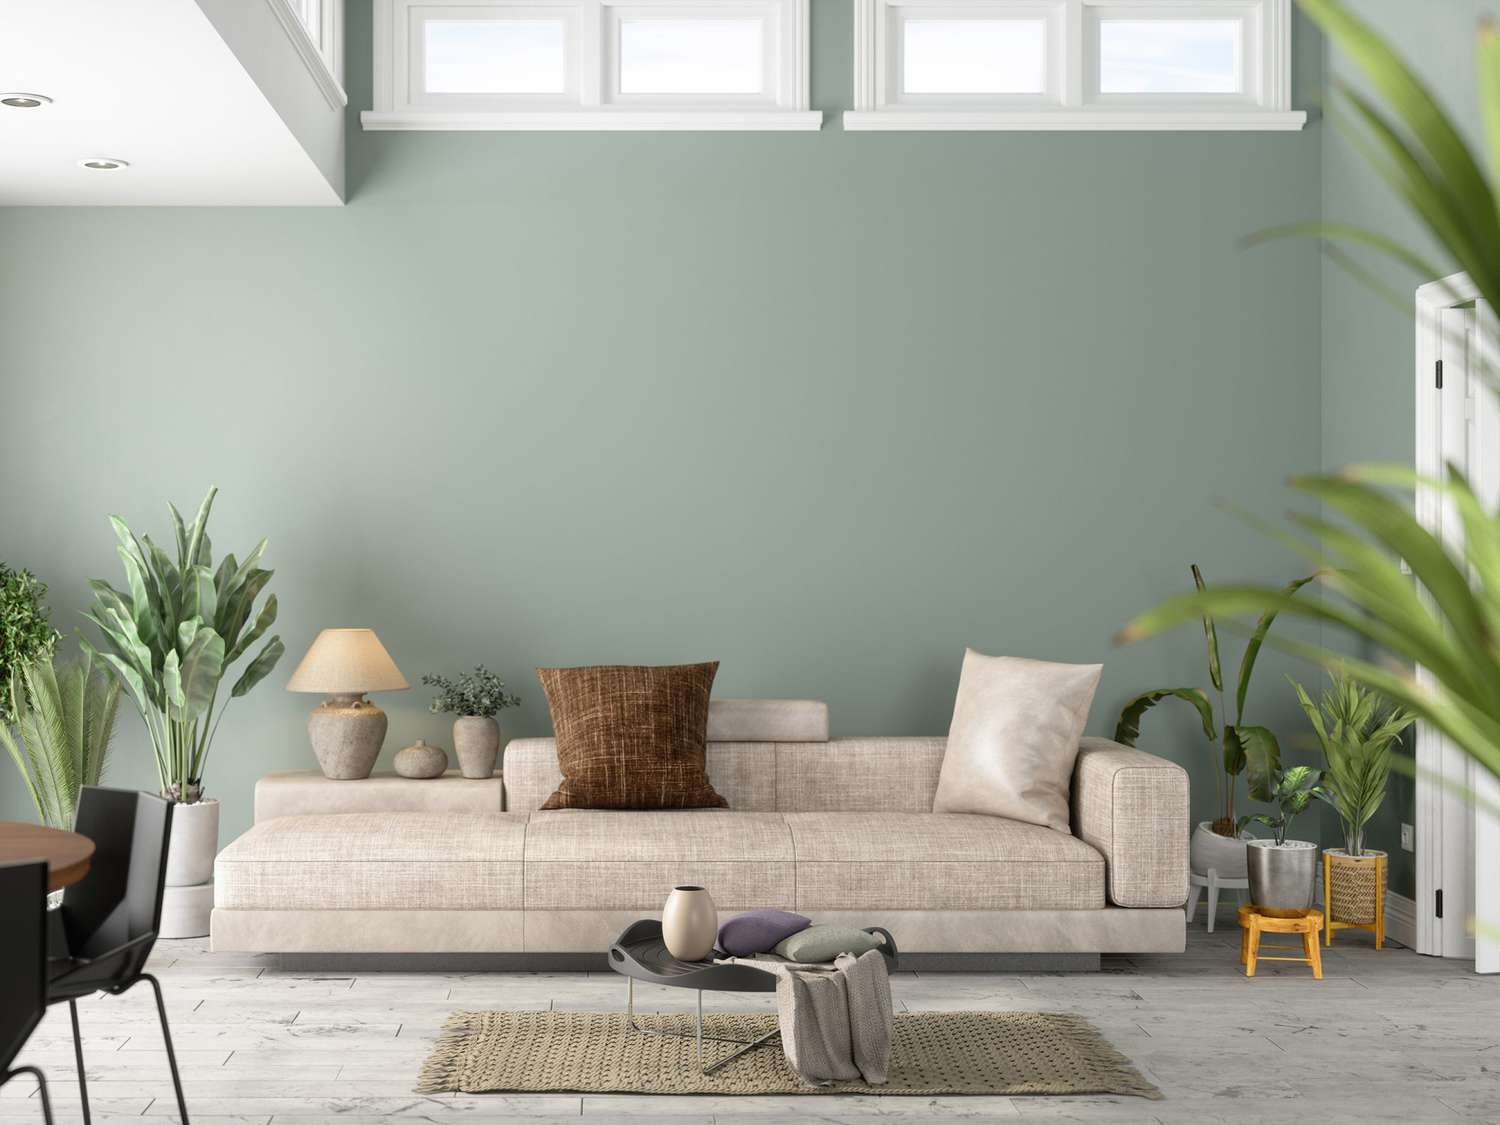 The 10 Best Living Room Paint Colors, According to Design Experts